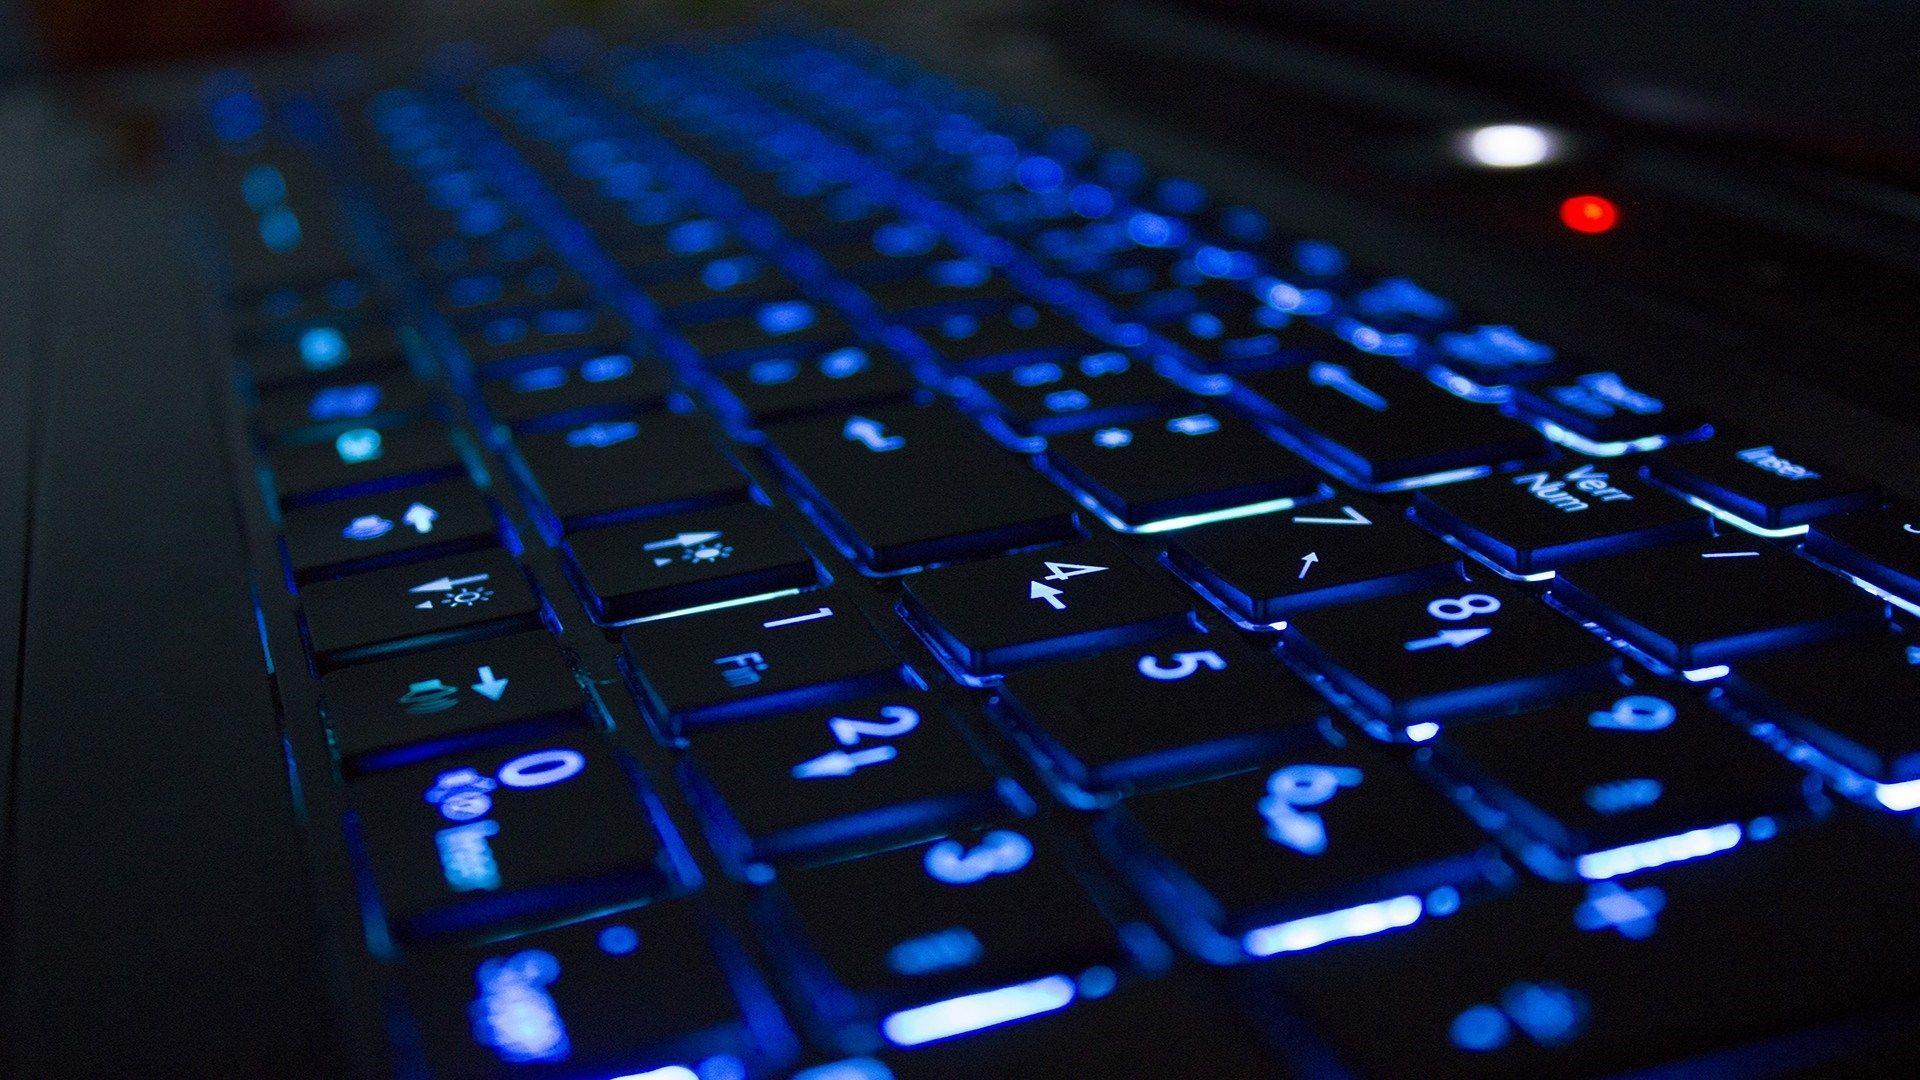 Keyboard Photos, Download The BEST Free Keyboard Stock Photos & HD Images